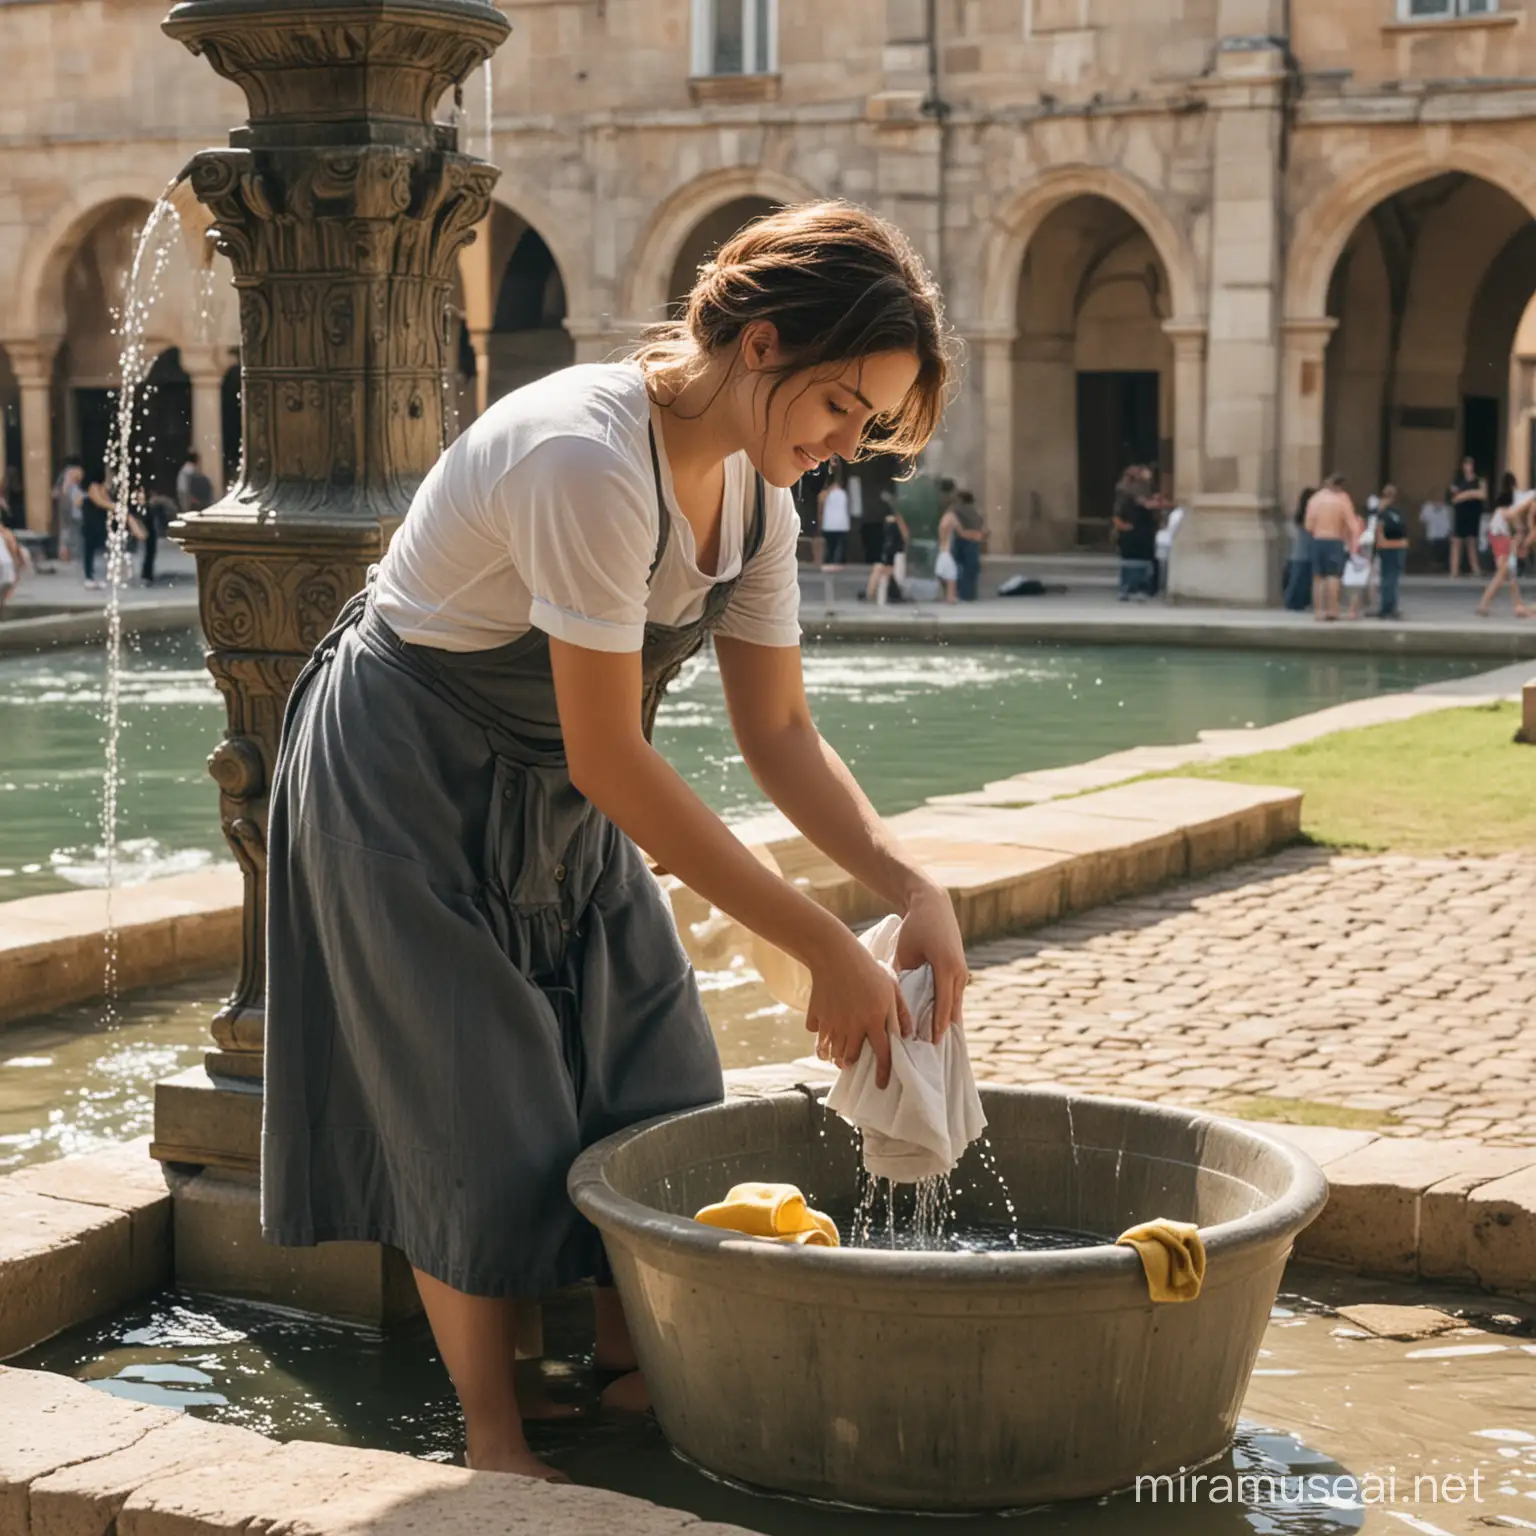 Young Woman Washing Clothes at the Fountain